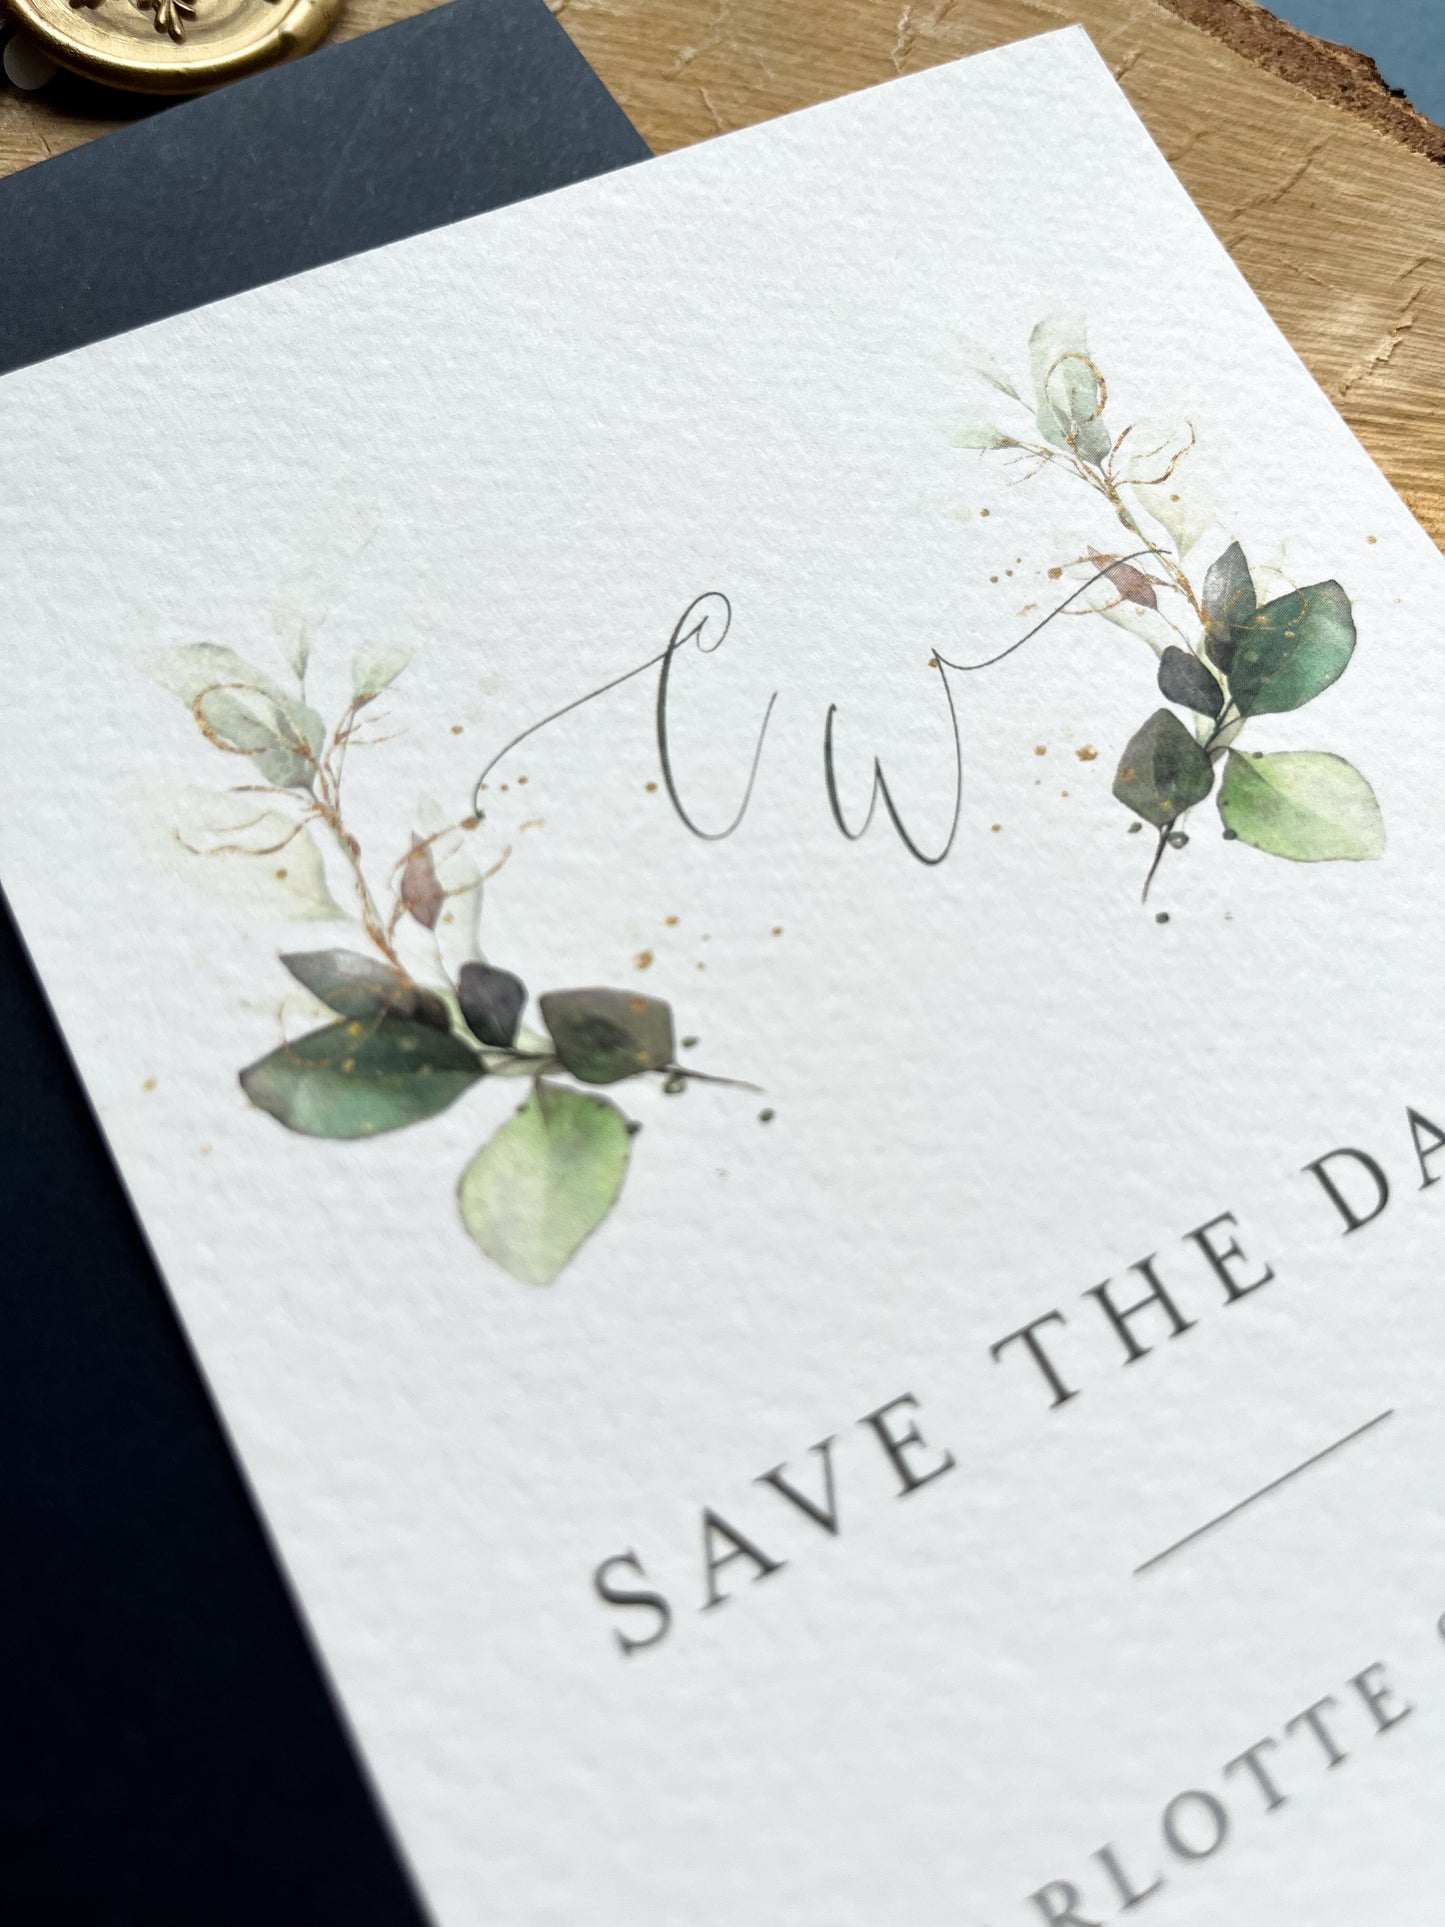 Navy and greenery design save the date